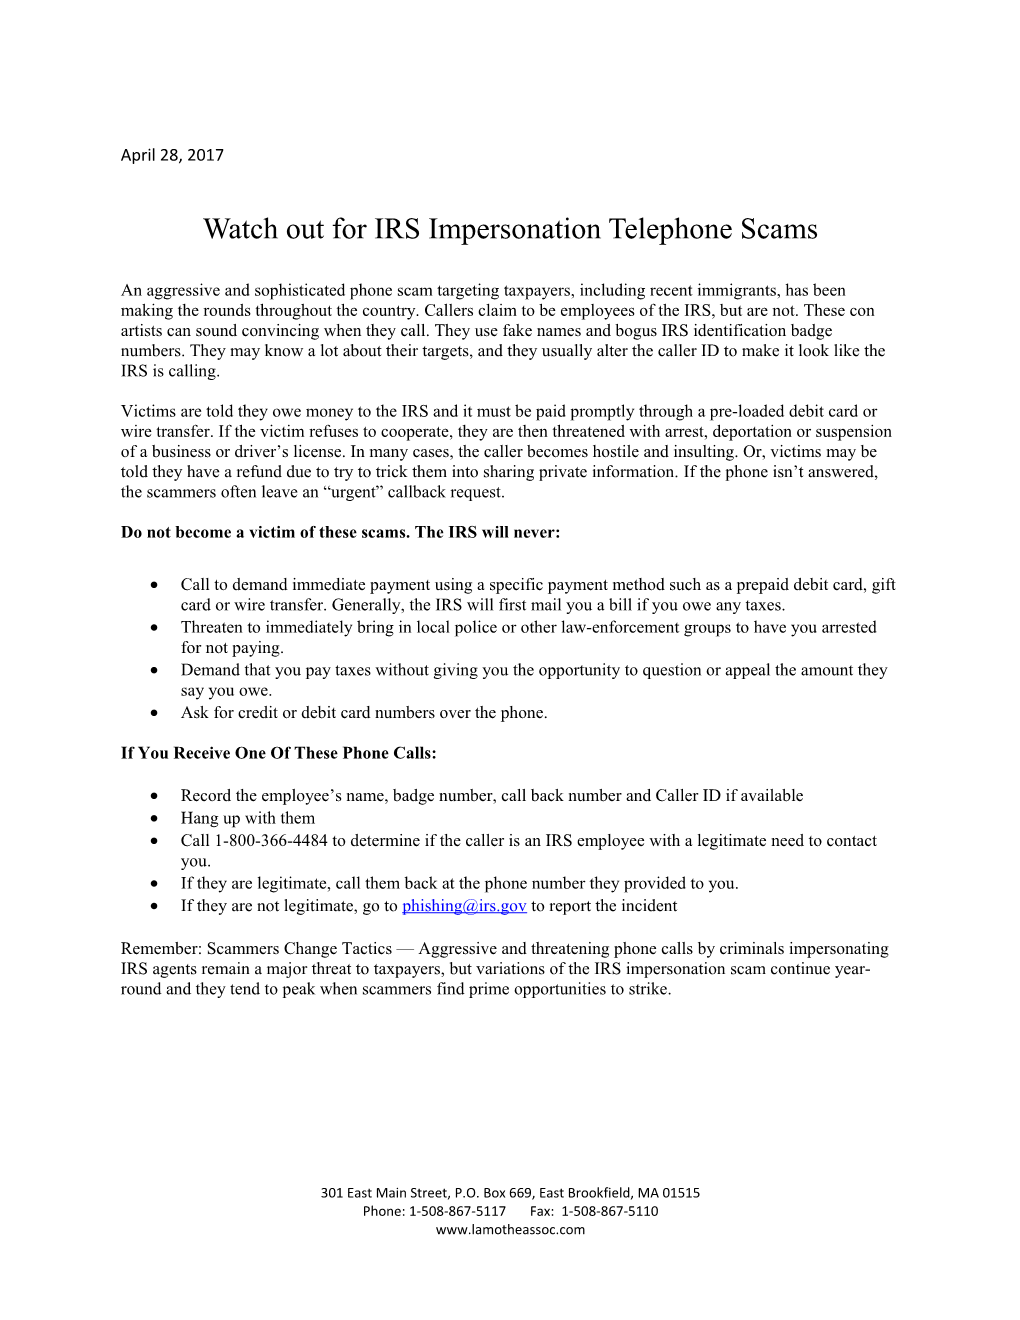 Watch out for IRS Impersonation Telephone Scams